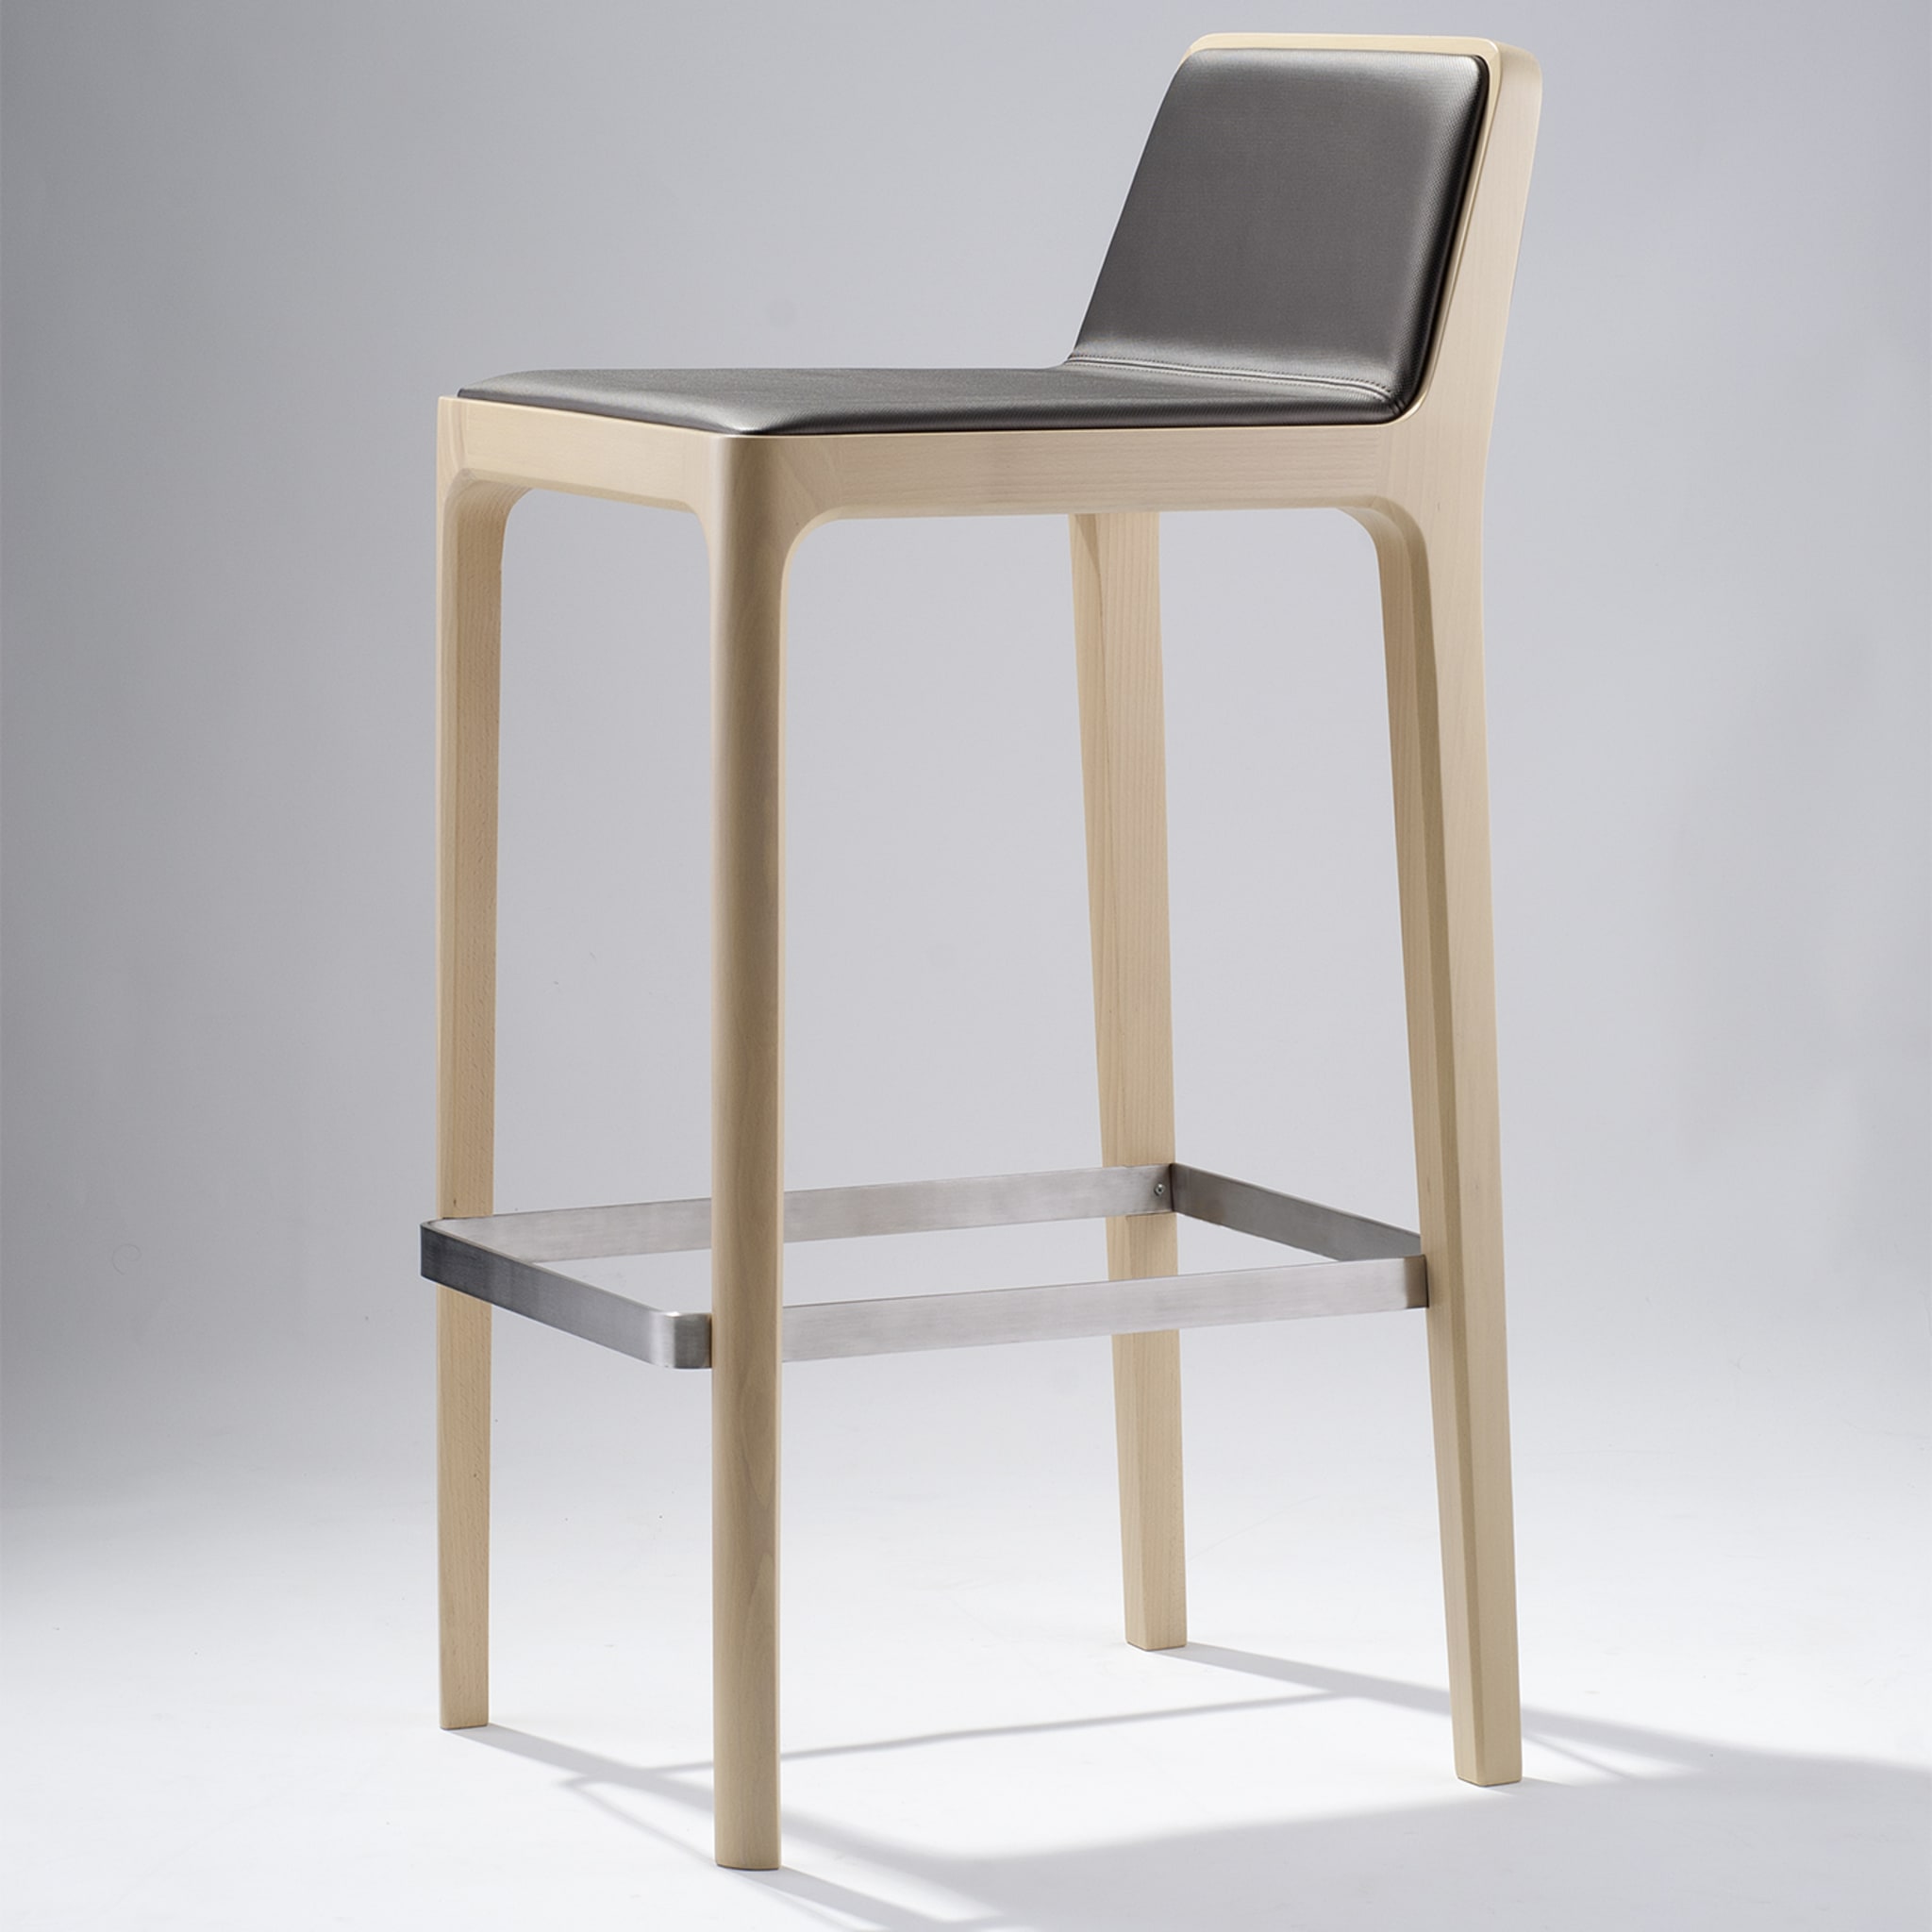 Tip Tap 383 Bar Stool by Claudio Perin - Alternative view 3